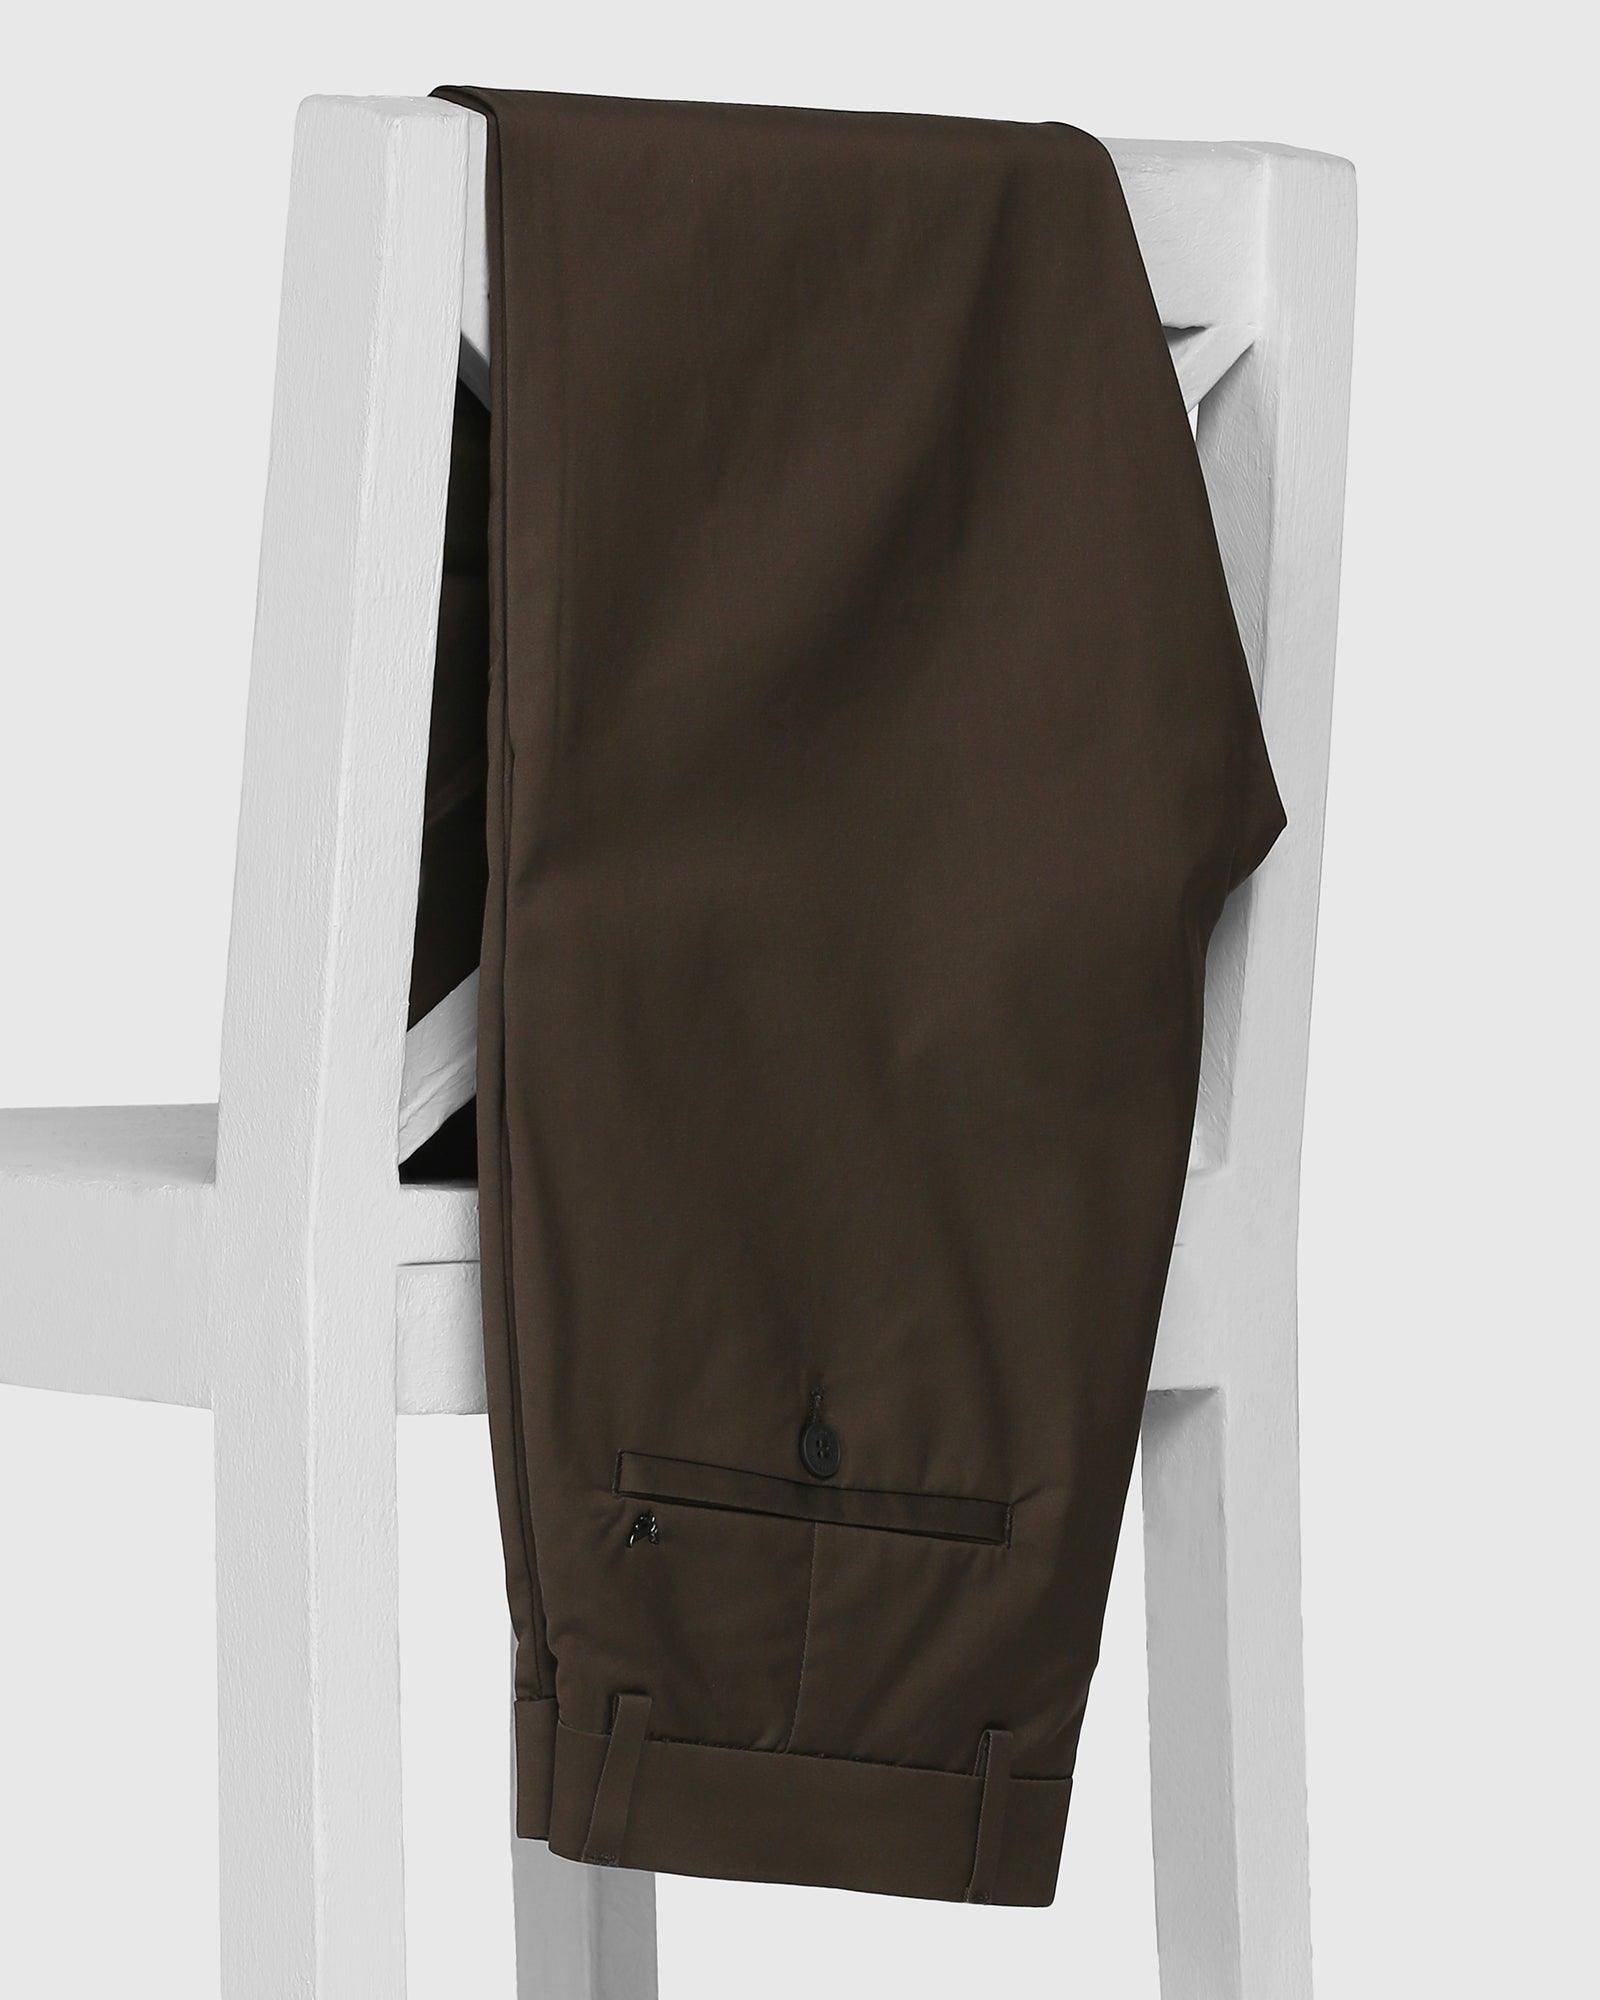 TechPro Slim Fit B-91 Casual Dark Olive Solid Khakis - Nord